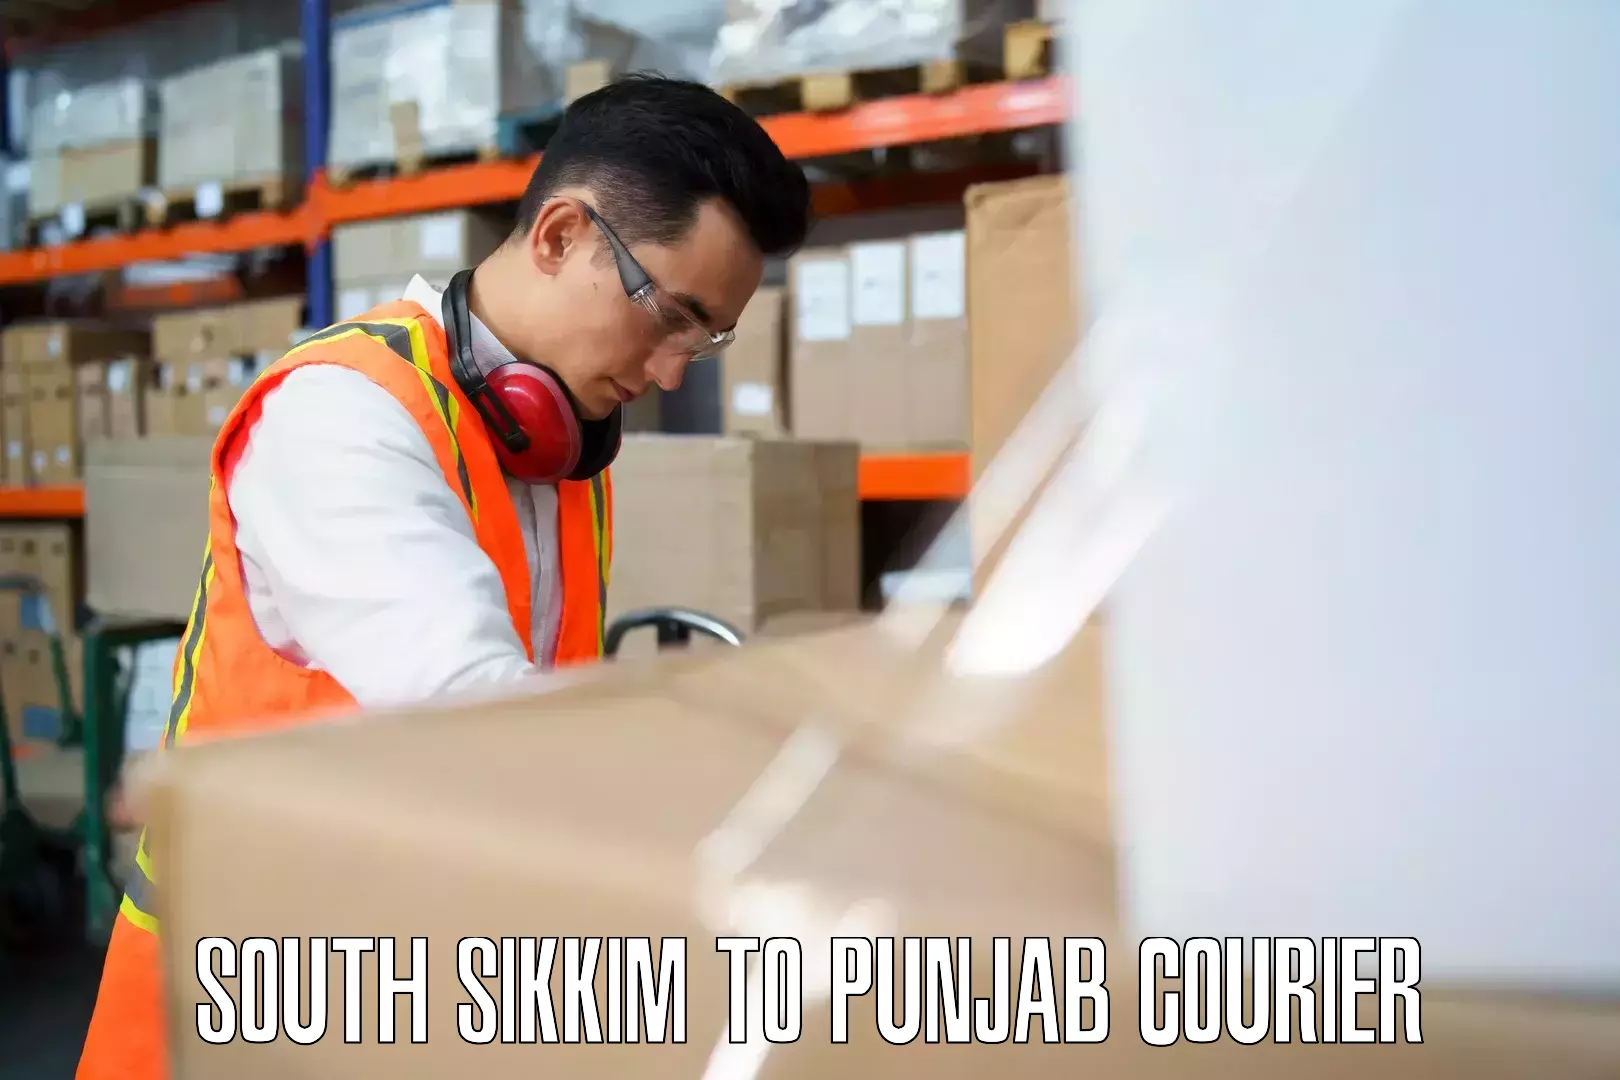 Luggage shipping planner South Sikkim to Rajpura